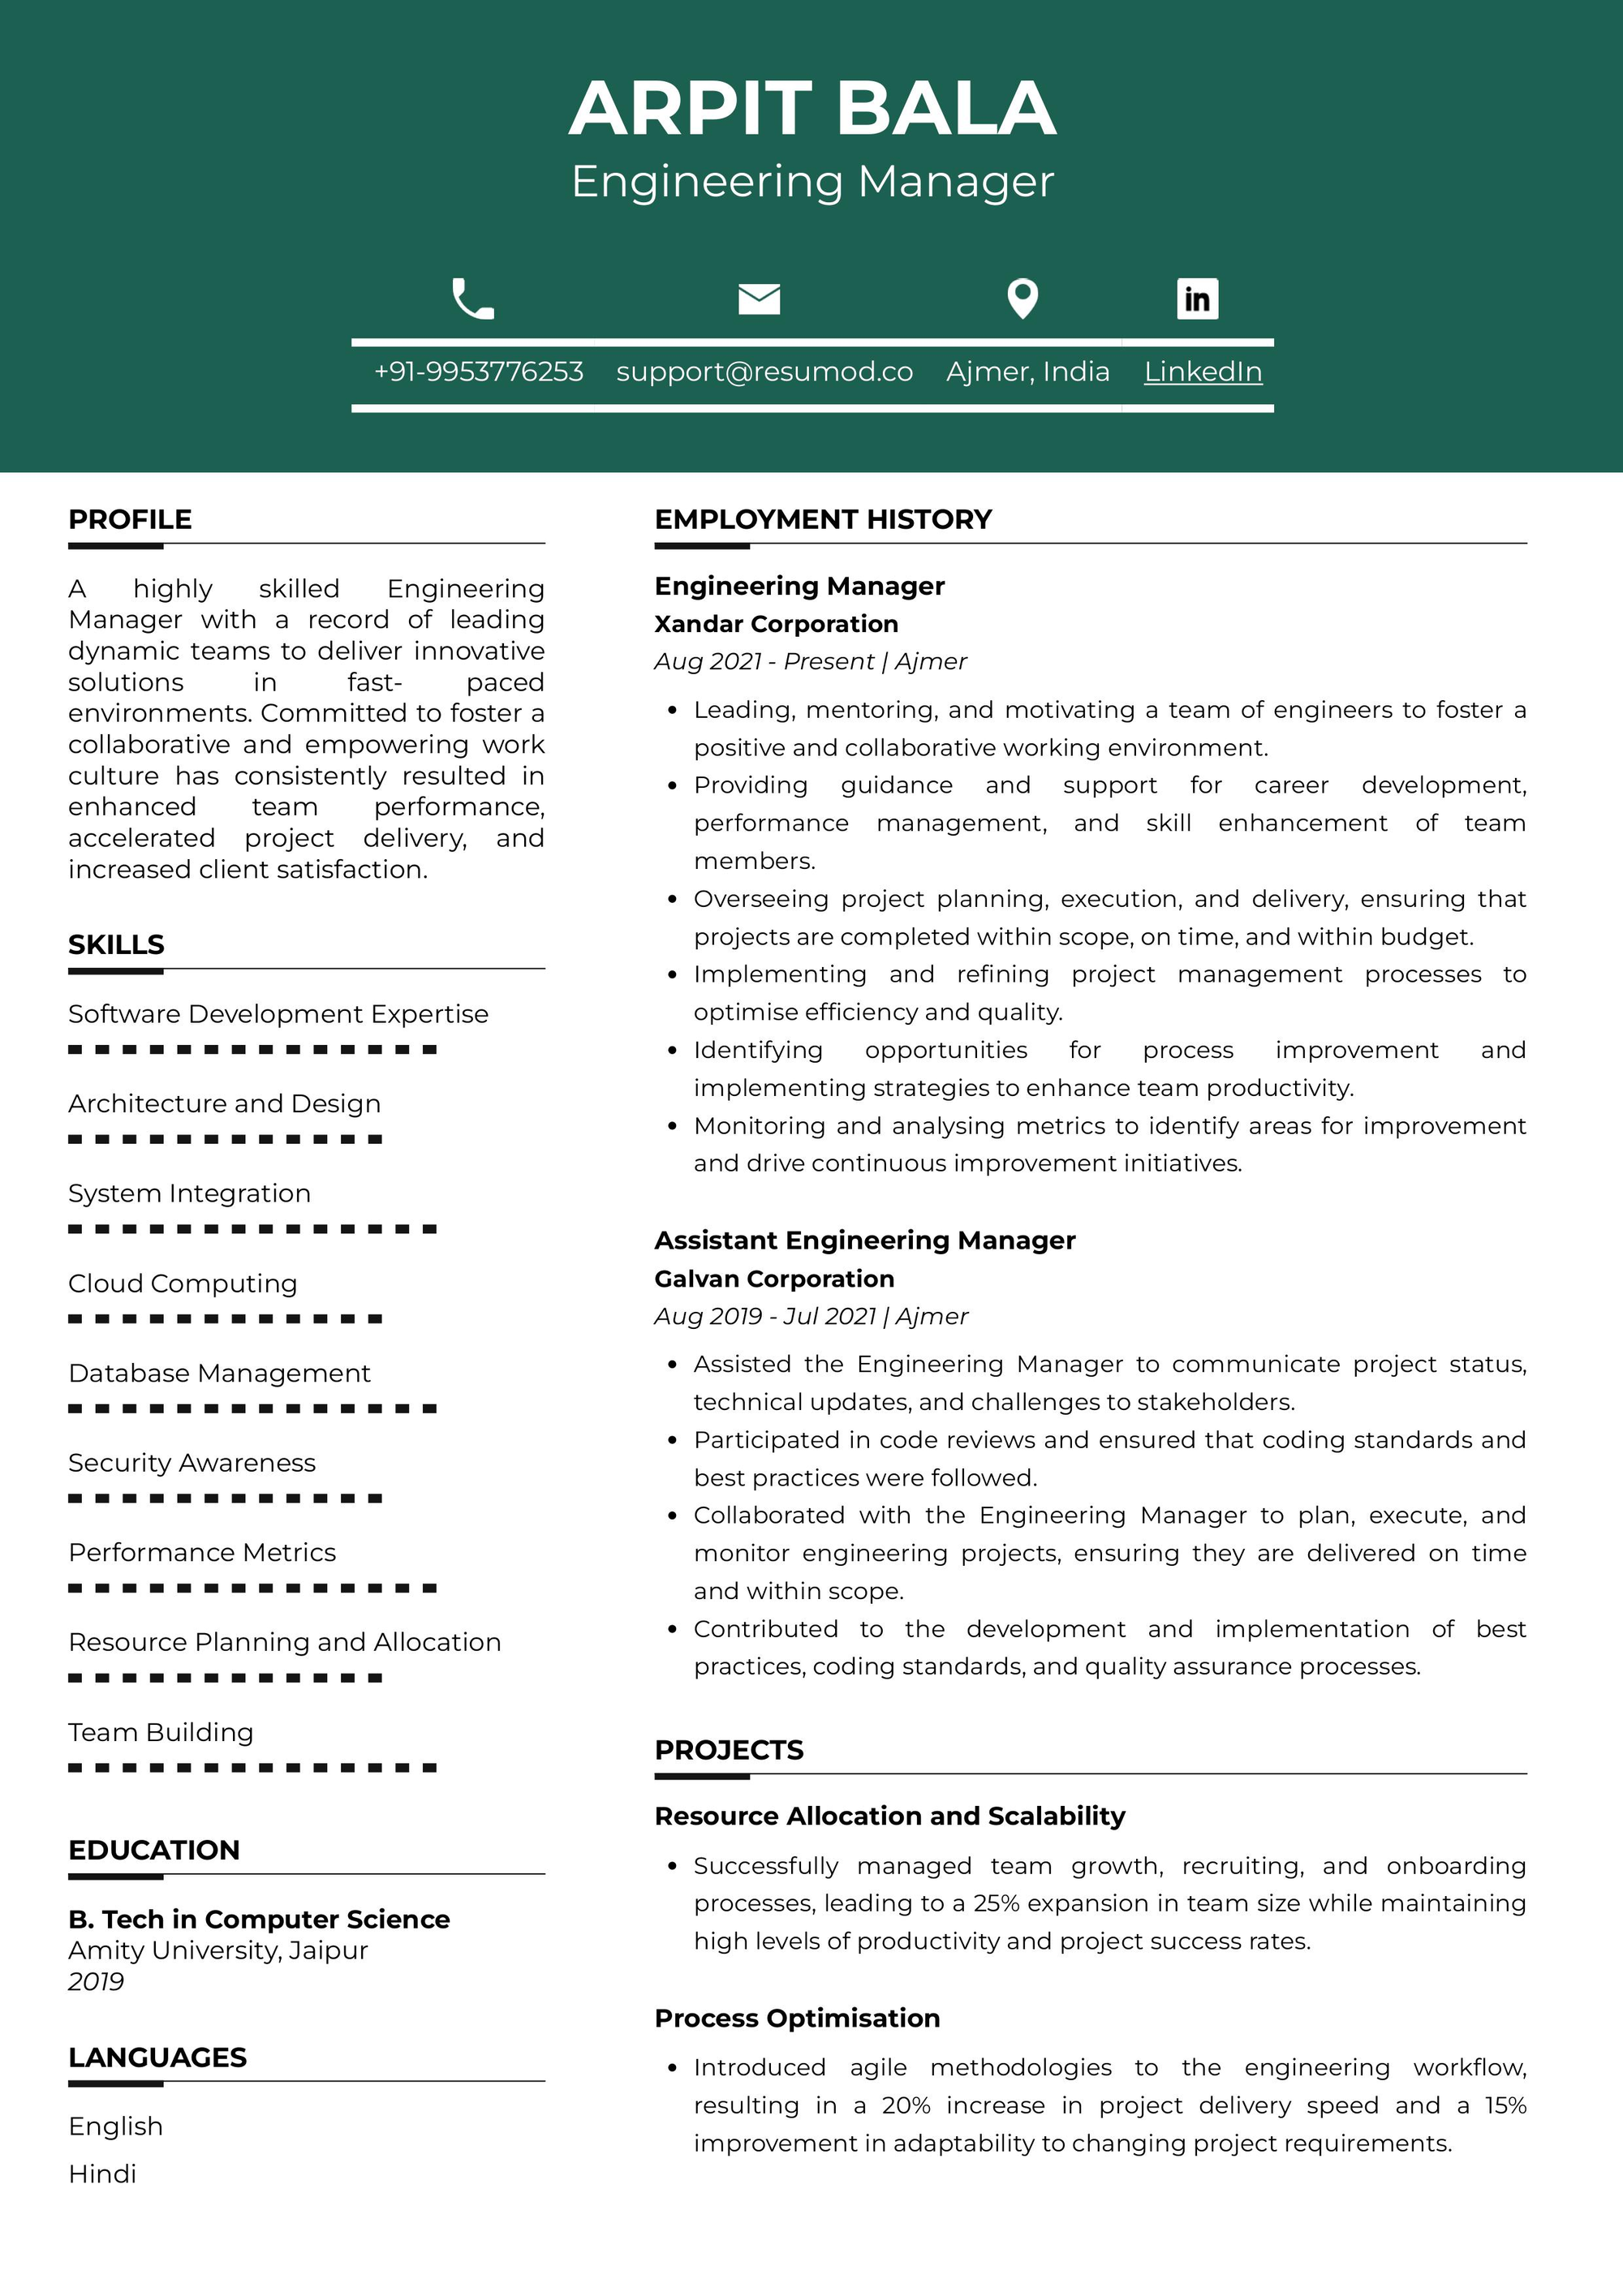 Resume of Engineering Manager 